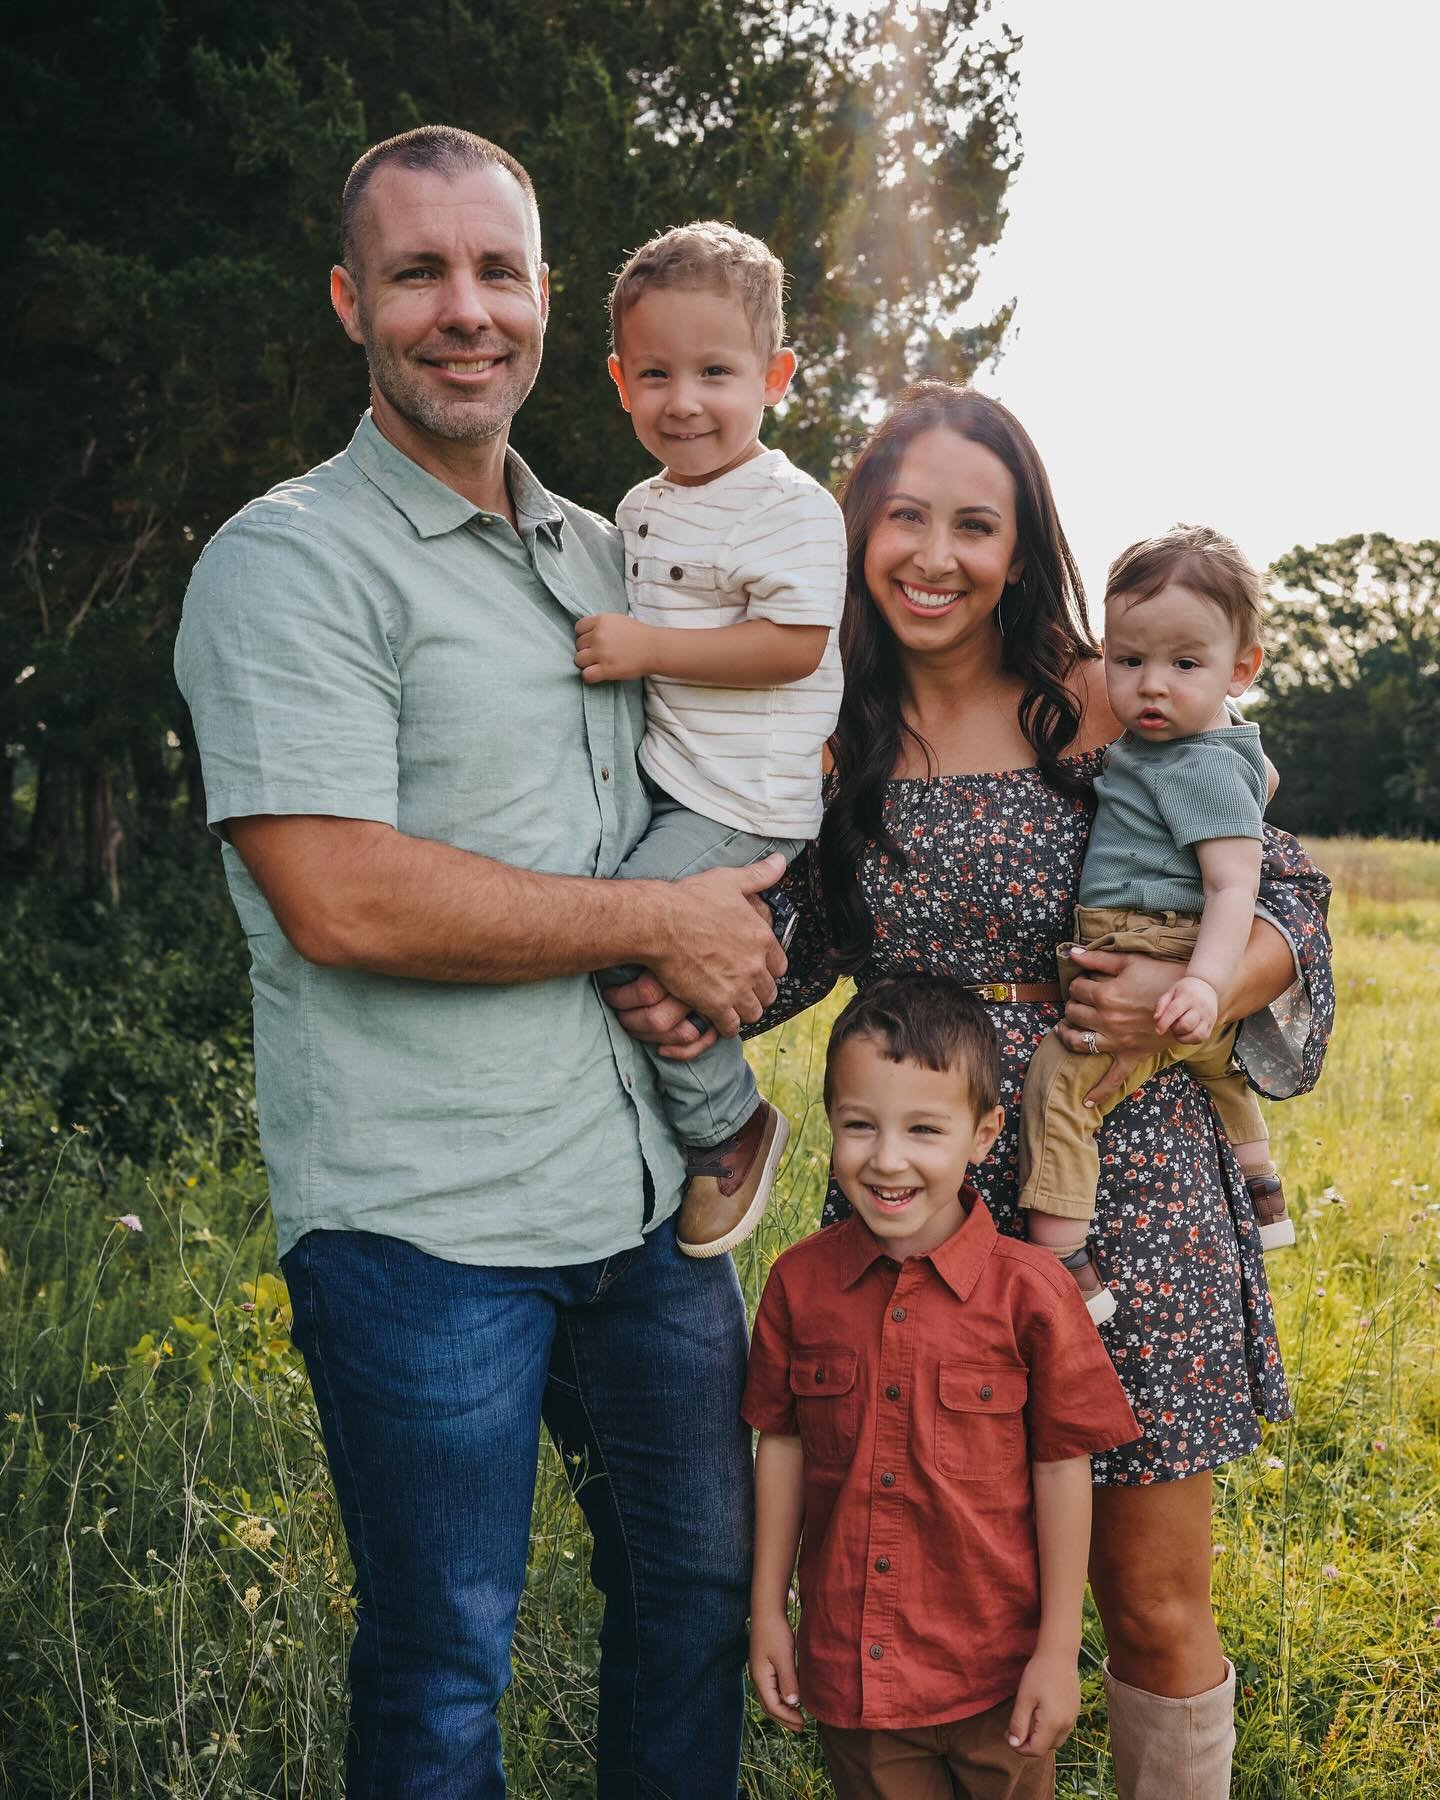 The first time with new baby family photos will always be my favorite🥹 Loved chasing these sweet boys around early this morning on a beautiful day📸
.
Mom&rsquo;s are always the one taking pictures. Family photos are the perfect Mother&rsquo;s Day g